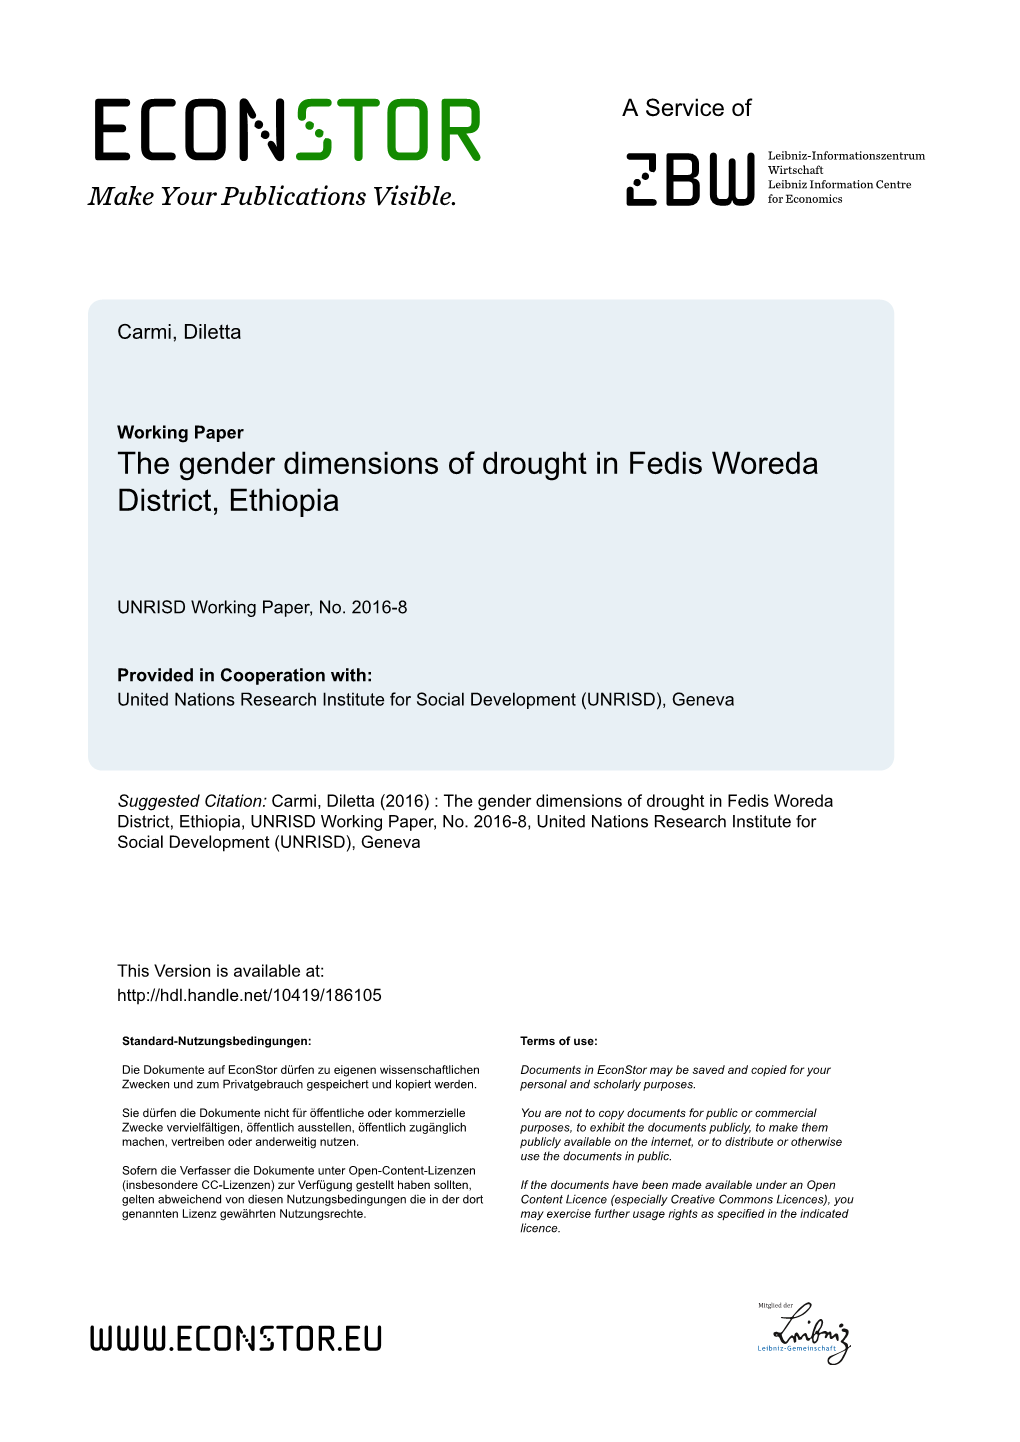 The Gender Dimensions of Drought in Fedis Woreda District, Ethiopia